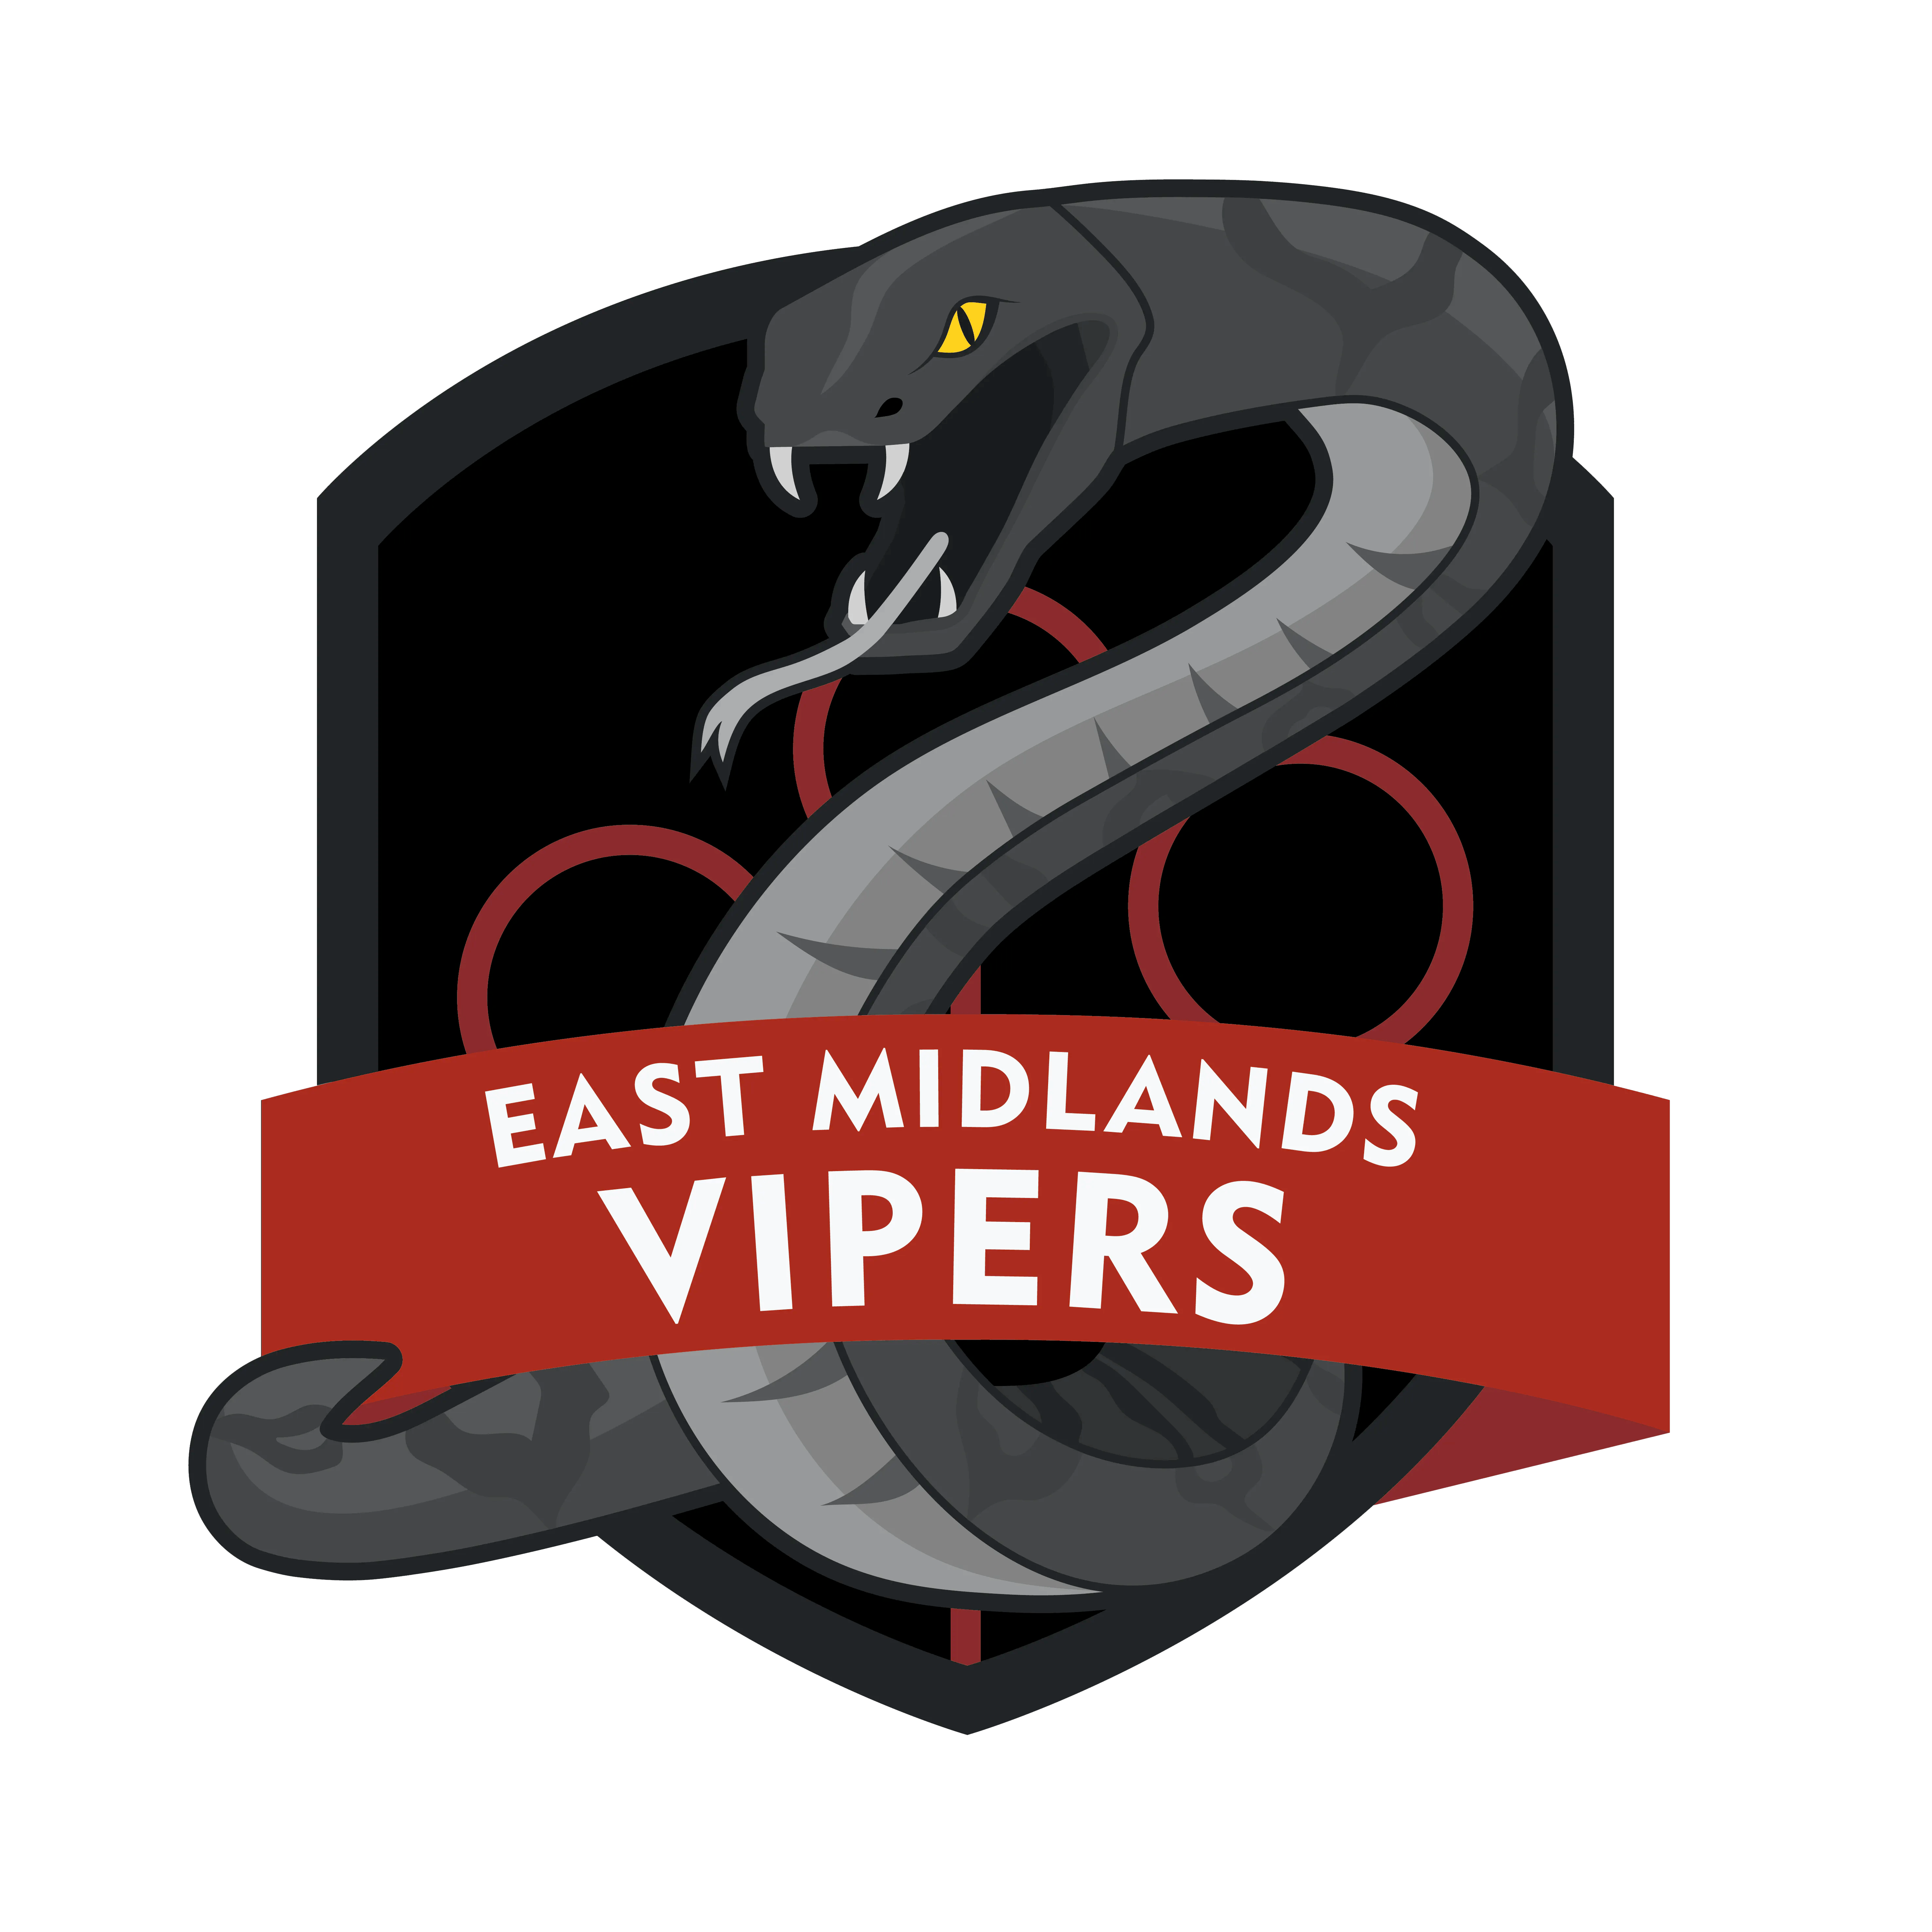 East Midlands Vipers logo